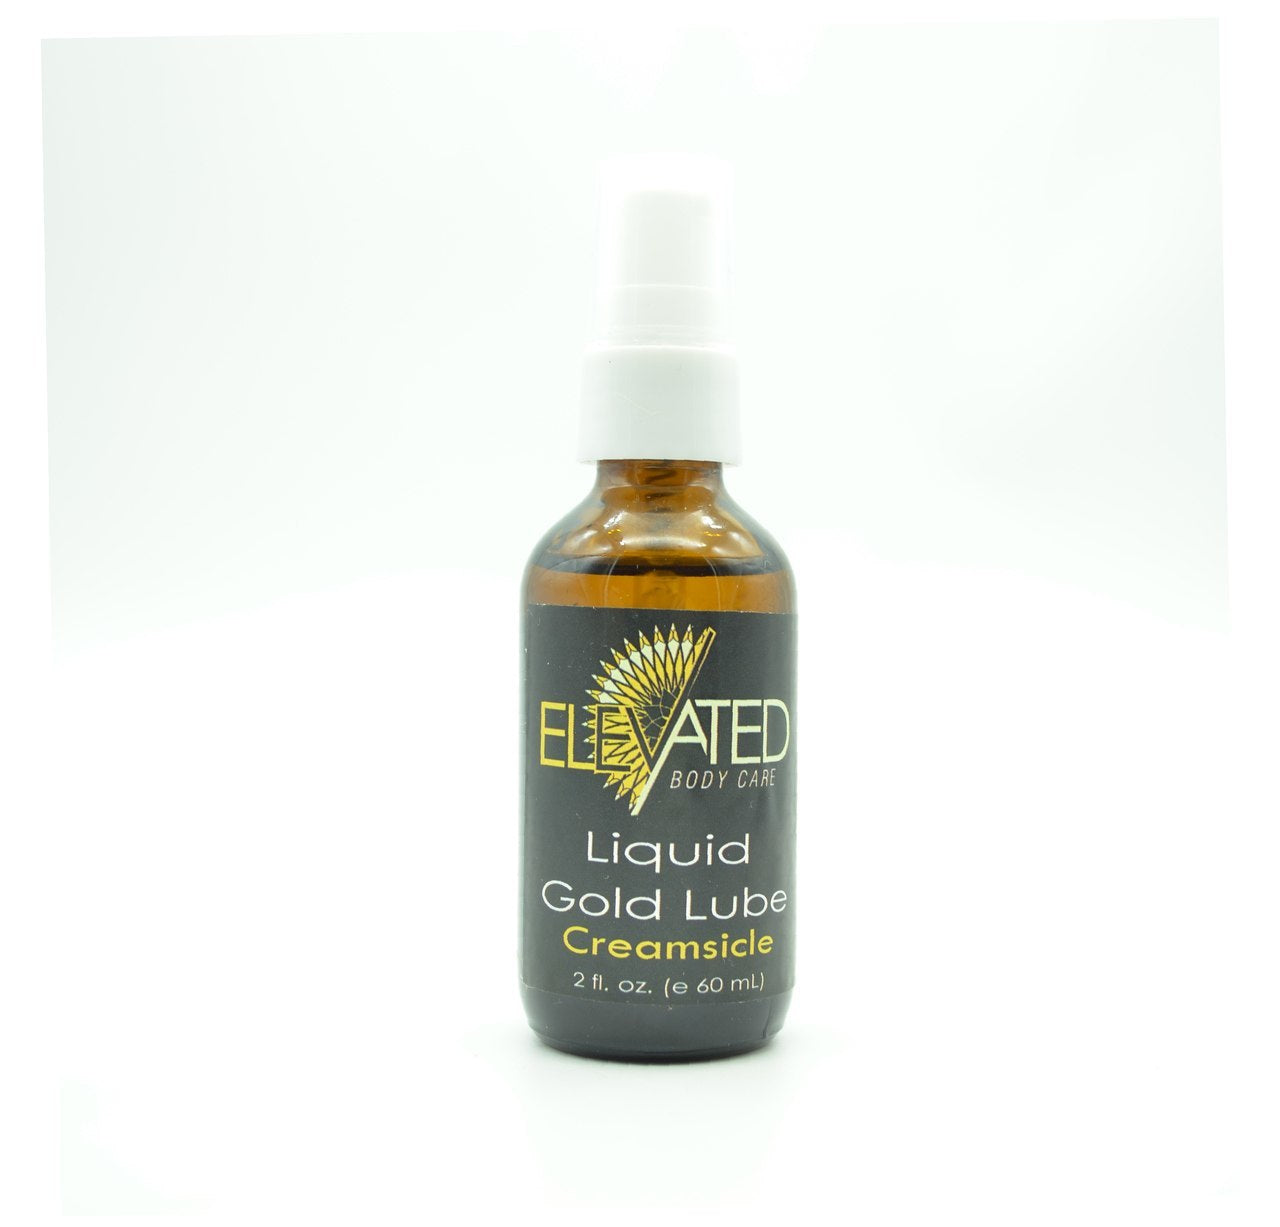 ELEVATED – Lover’s Liquid Gold Lube